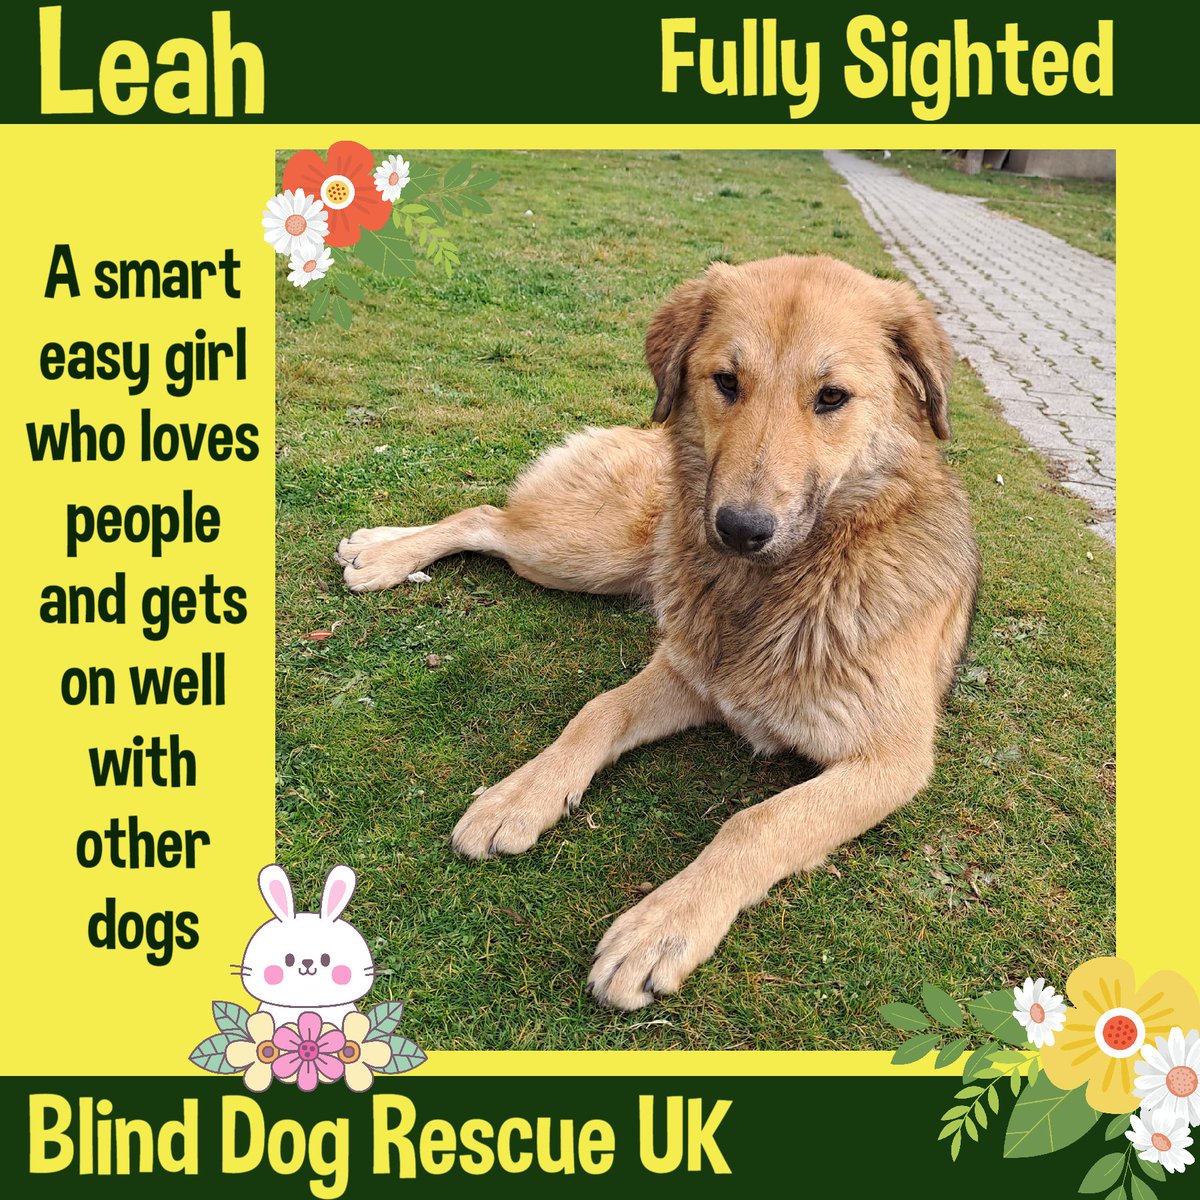 #rehomehour LEAH is medium-sized & was born around August 2022. She is fully sighted. She is friendly with humans & other dogs, a smart, obedient & playful pupster who is a very easy dog. See Leah here: youtube.com/shorts/gNJZ295… She would love a home with a garden & can live with